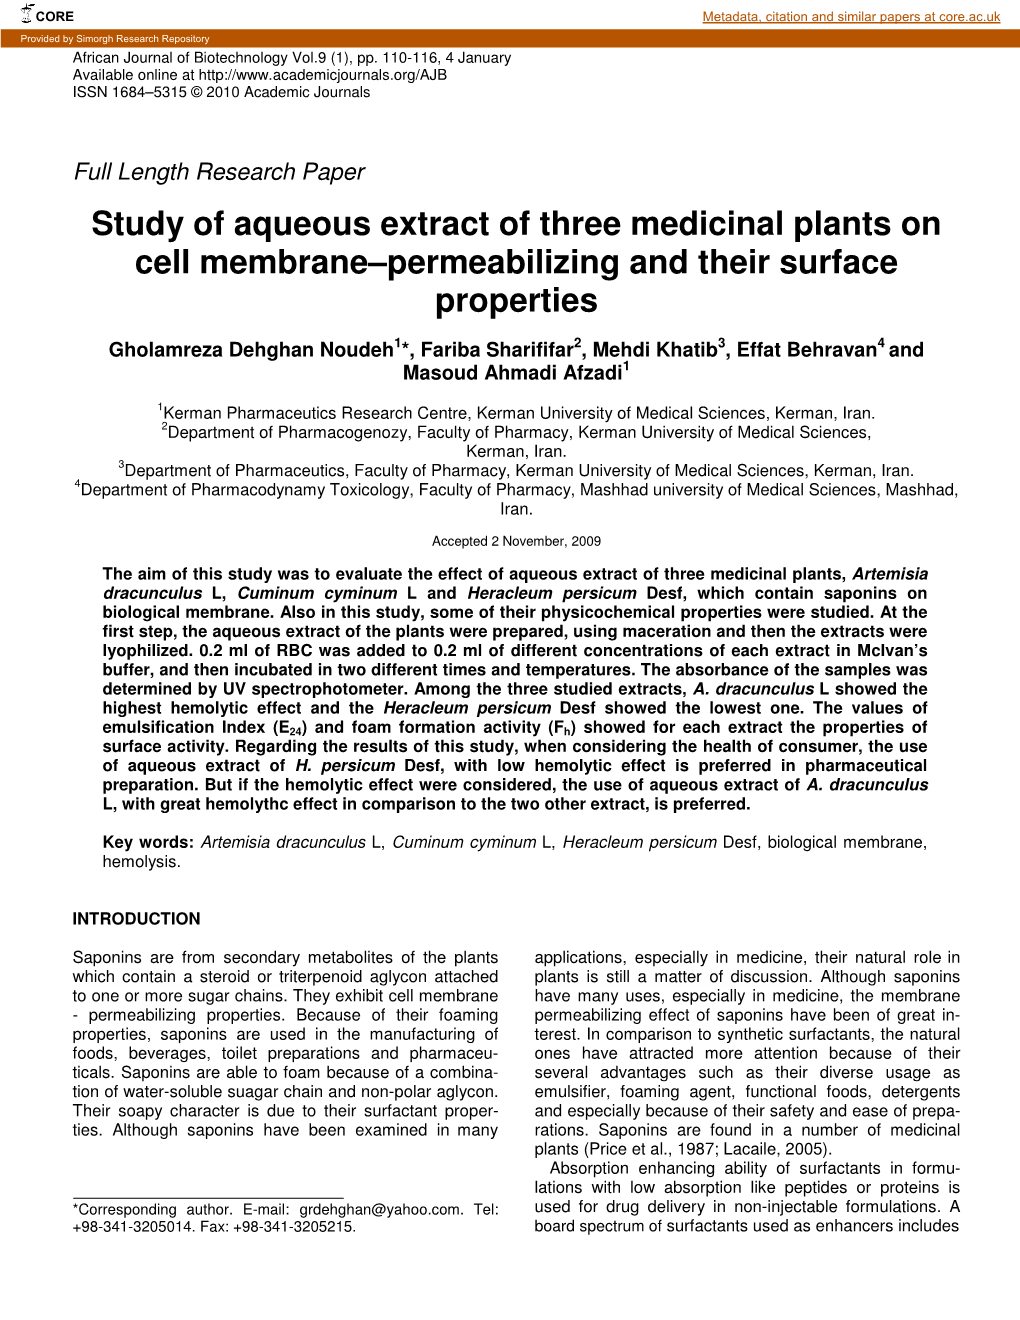 Study of Aqueous Extract of Three Medicinal Plants on Cell Membrane–Permeabilizing and Their Surface Properties